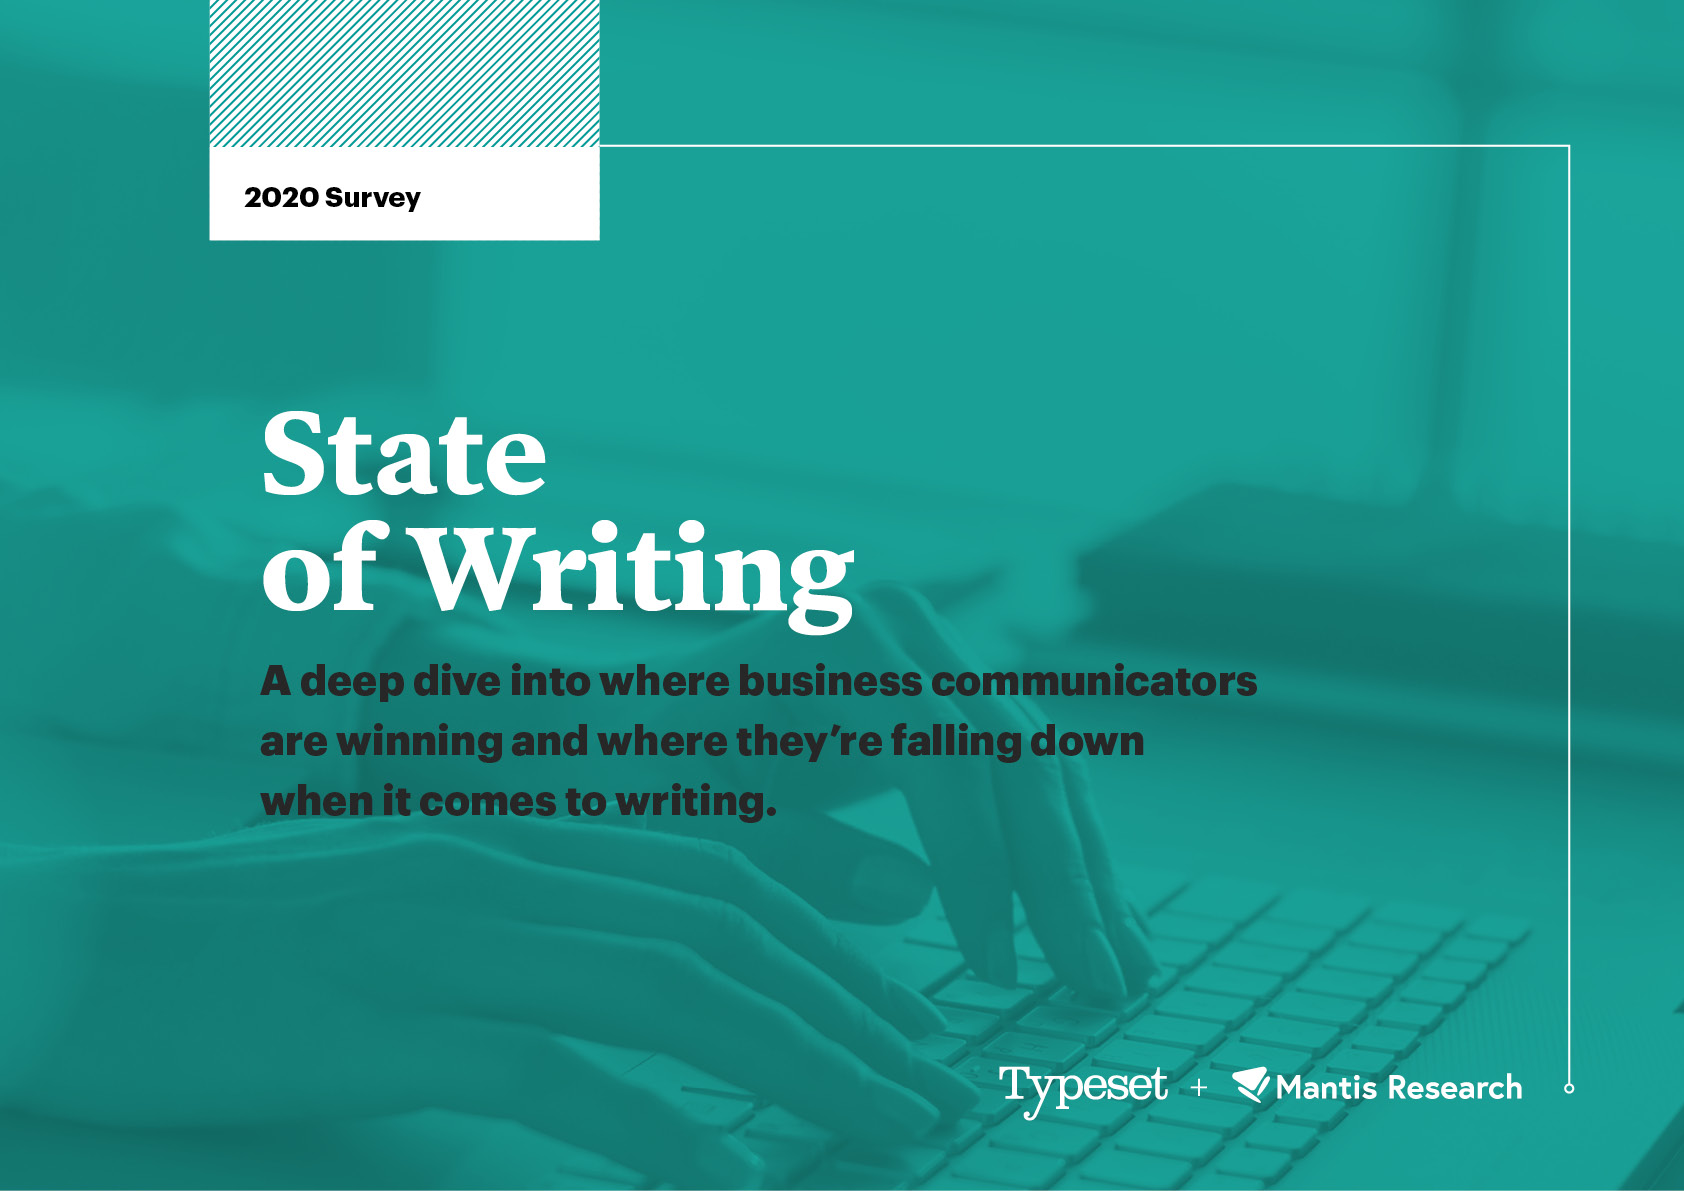 Cover of State of Writing 2020 research report from Typeset.